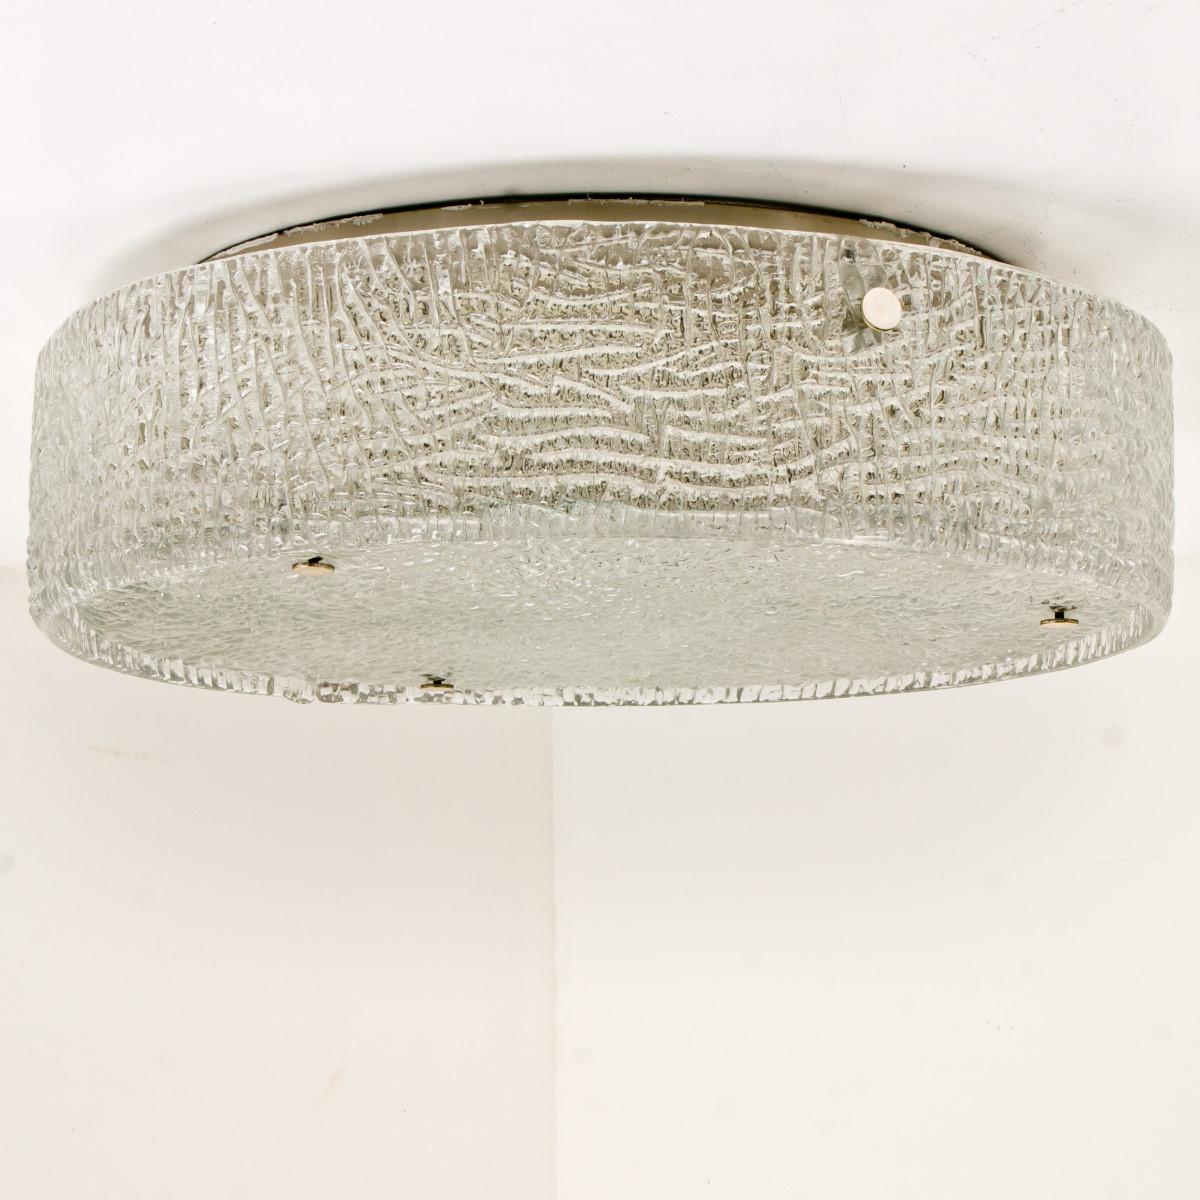 1 of the 6 Mid-Century Modern textured ice glass light fixtures by manufacturer Kaiser, circa 1965. Measures: Clean simple but high-end design. Illuminates beautifully. Each light fixture, often mistakenly attributed to Kalmar, features a huge